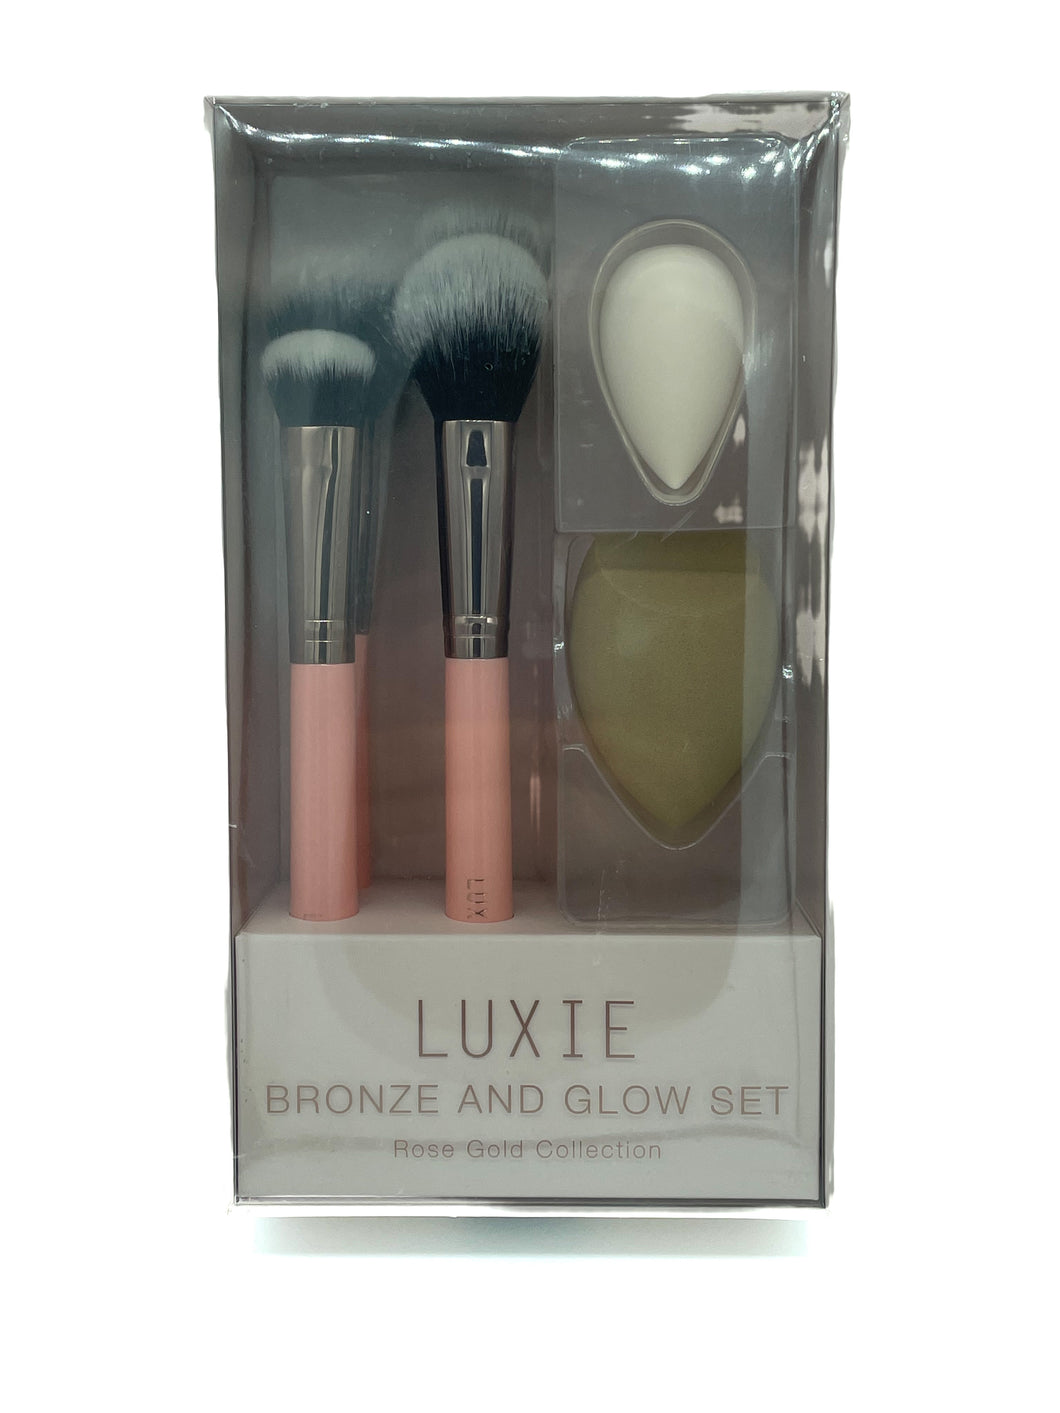 Luxie bronze and glow set